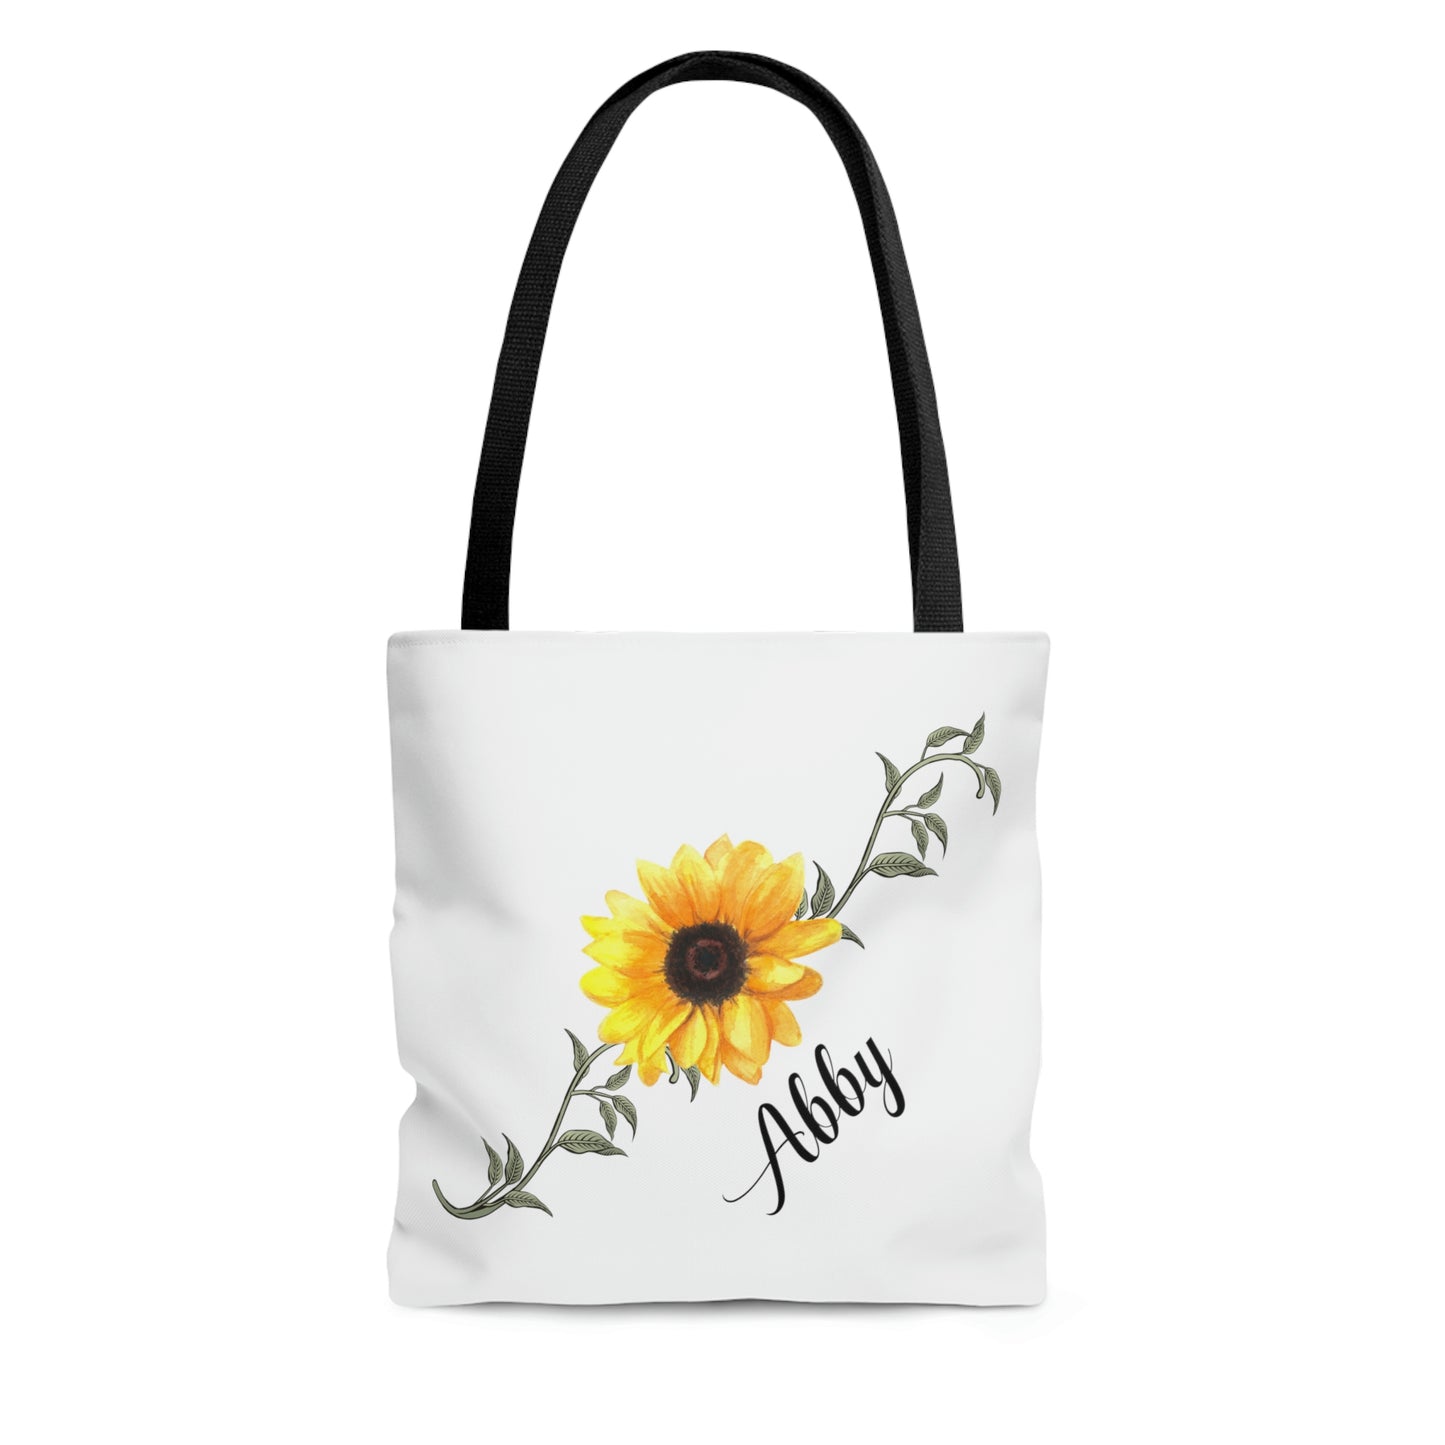 Sunflower Tote Bag, Yellow Floral Bag